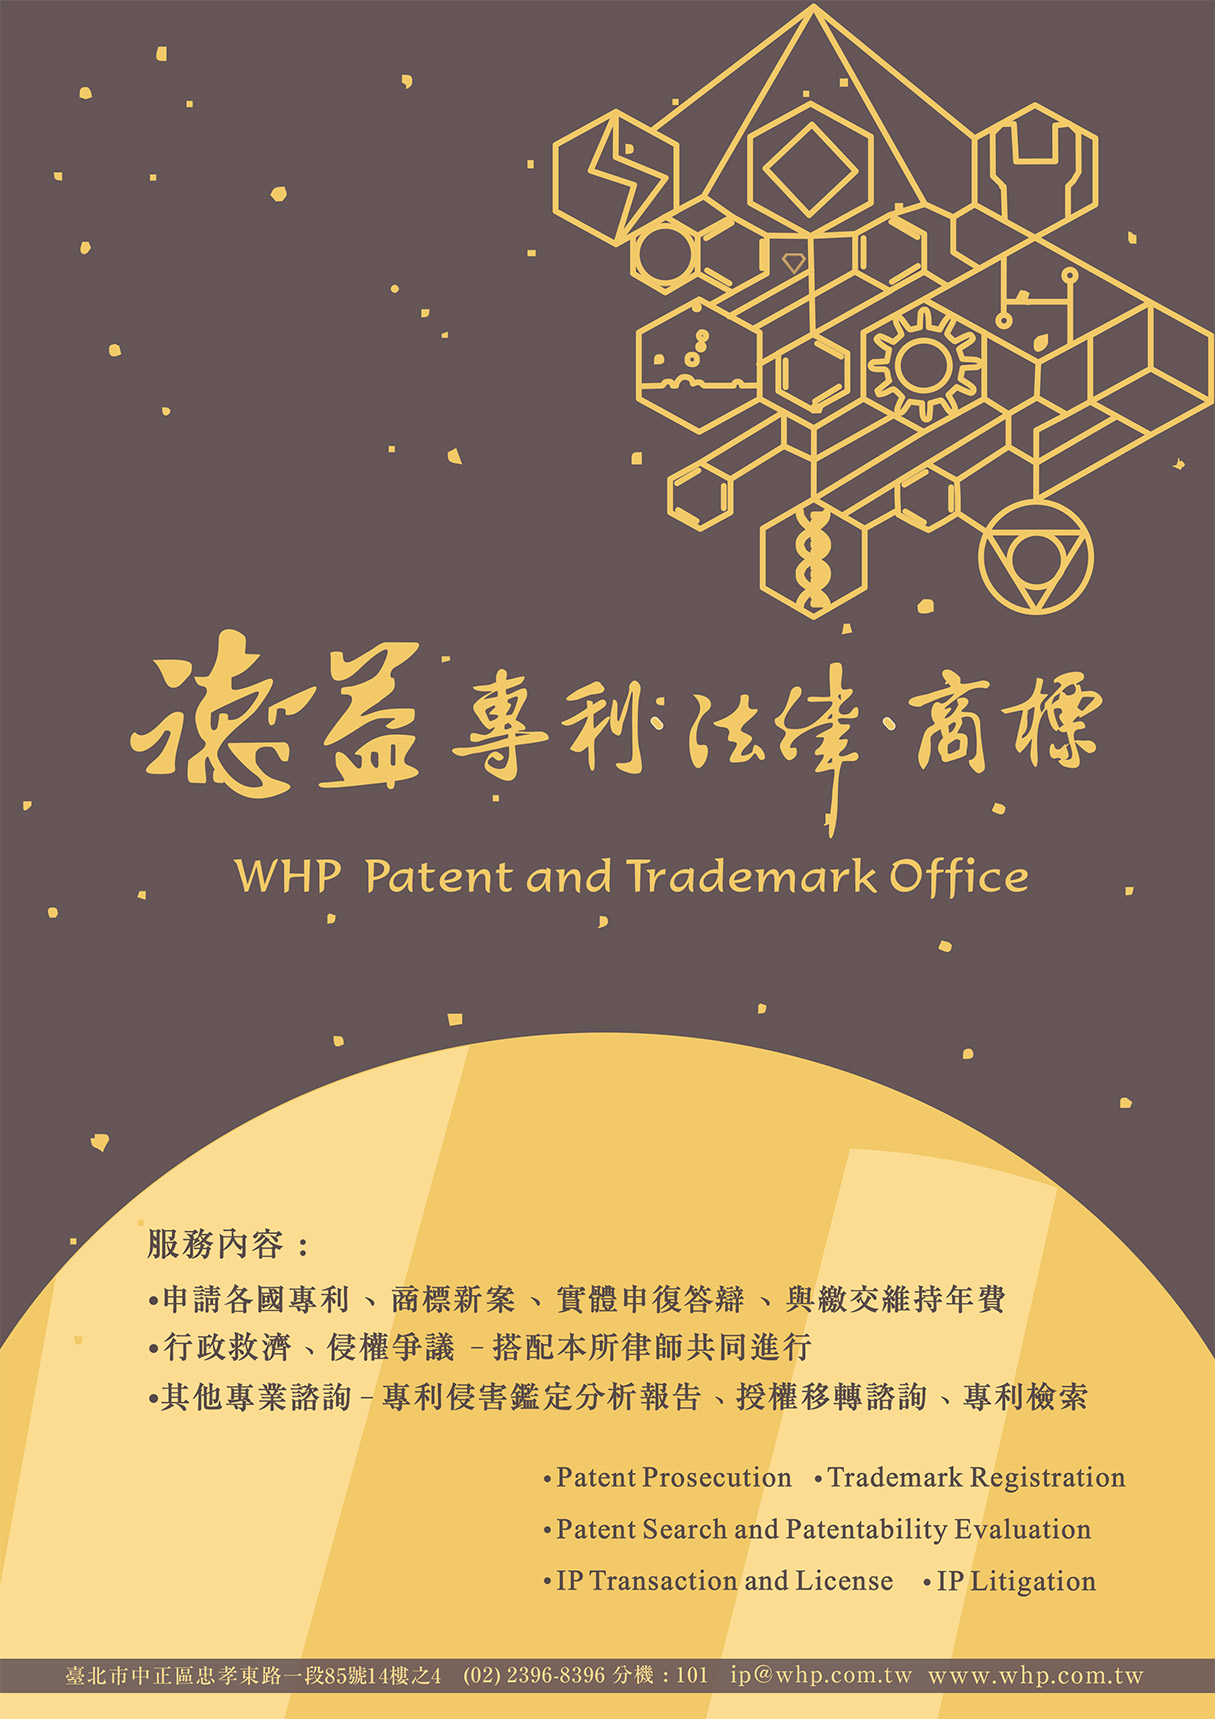 page-WHP Patent and Trademark Office